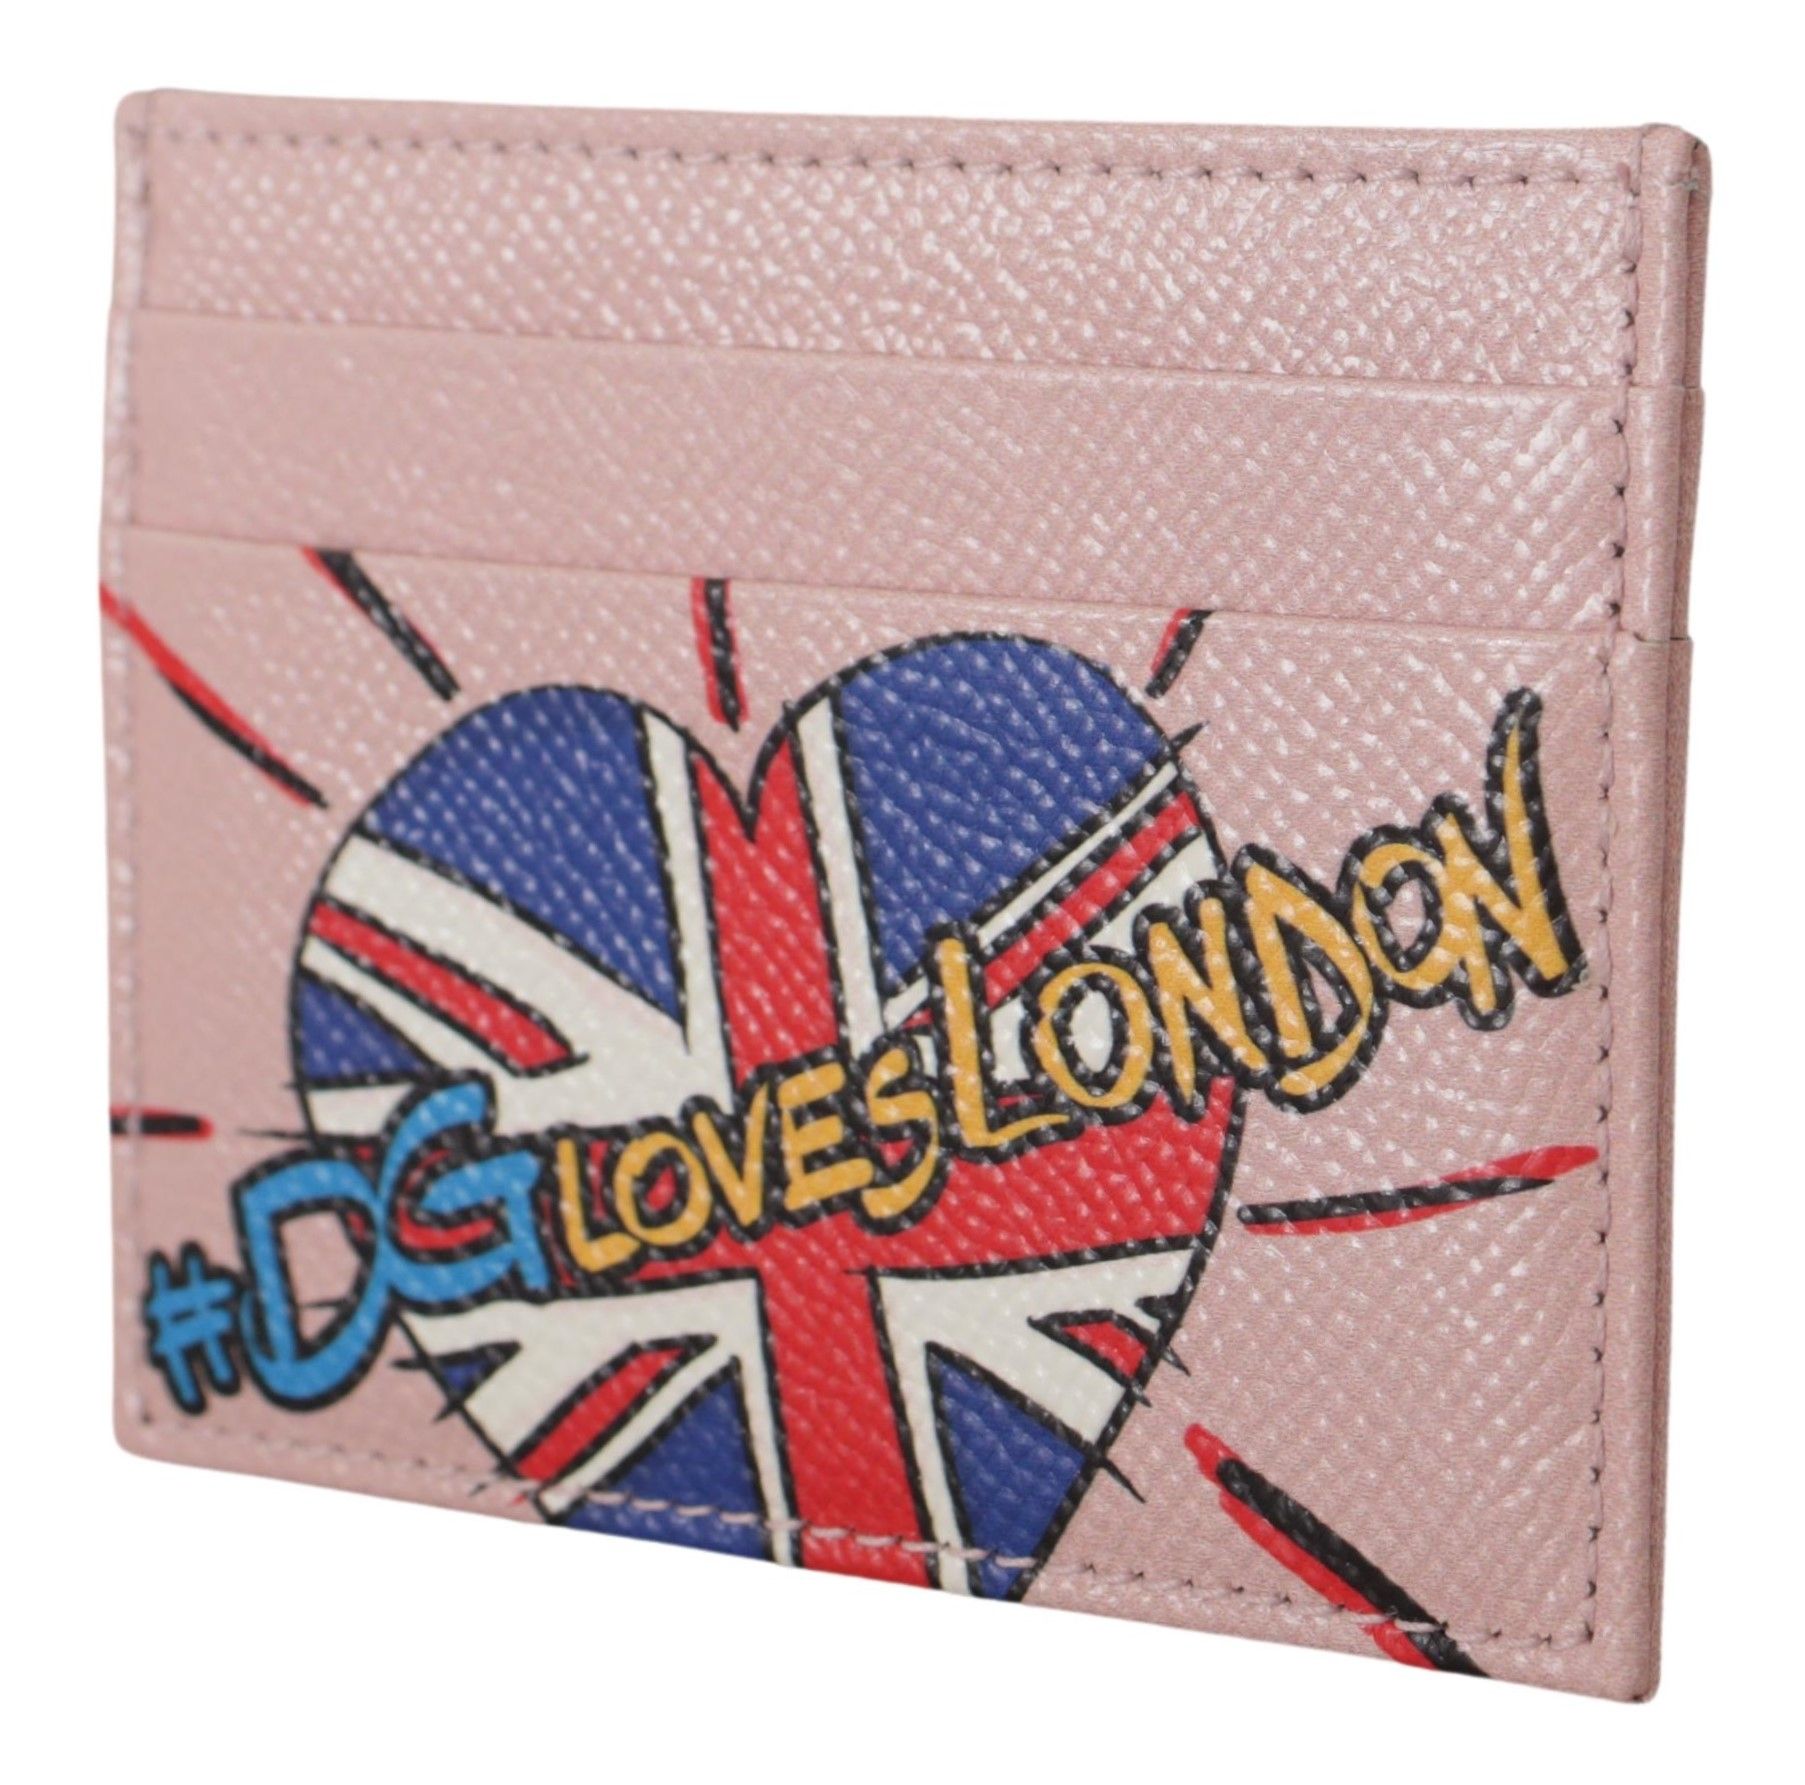 Gorgeous  Leather Cardholder Wallet with #DGLovesLondon Print